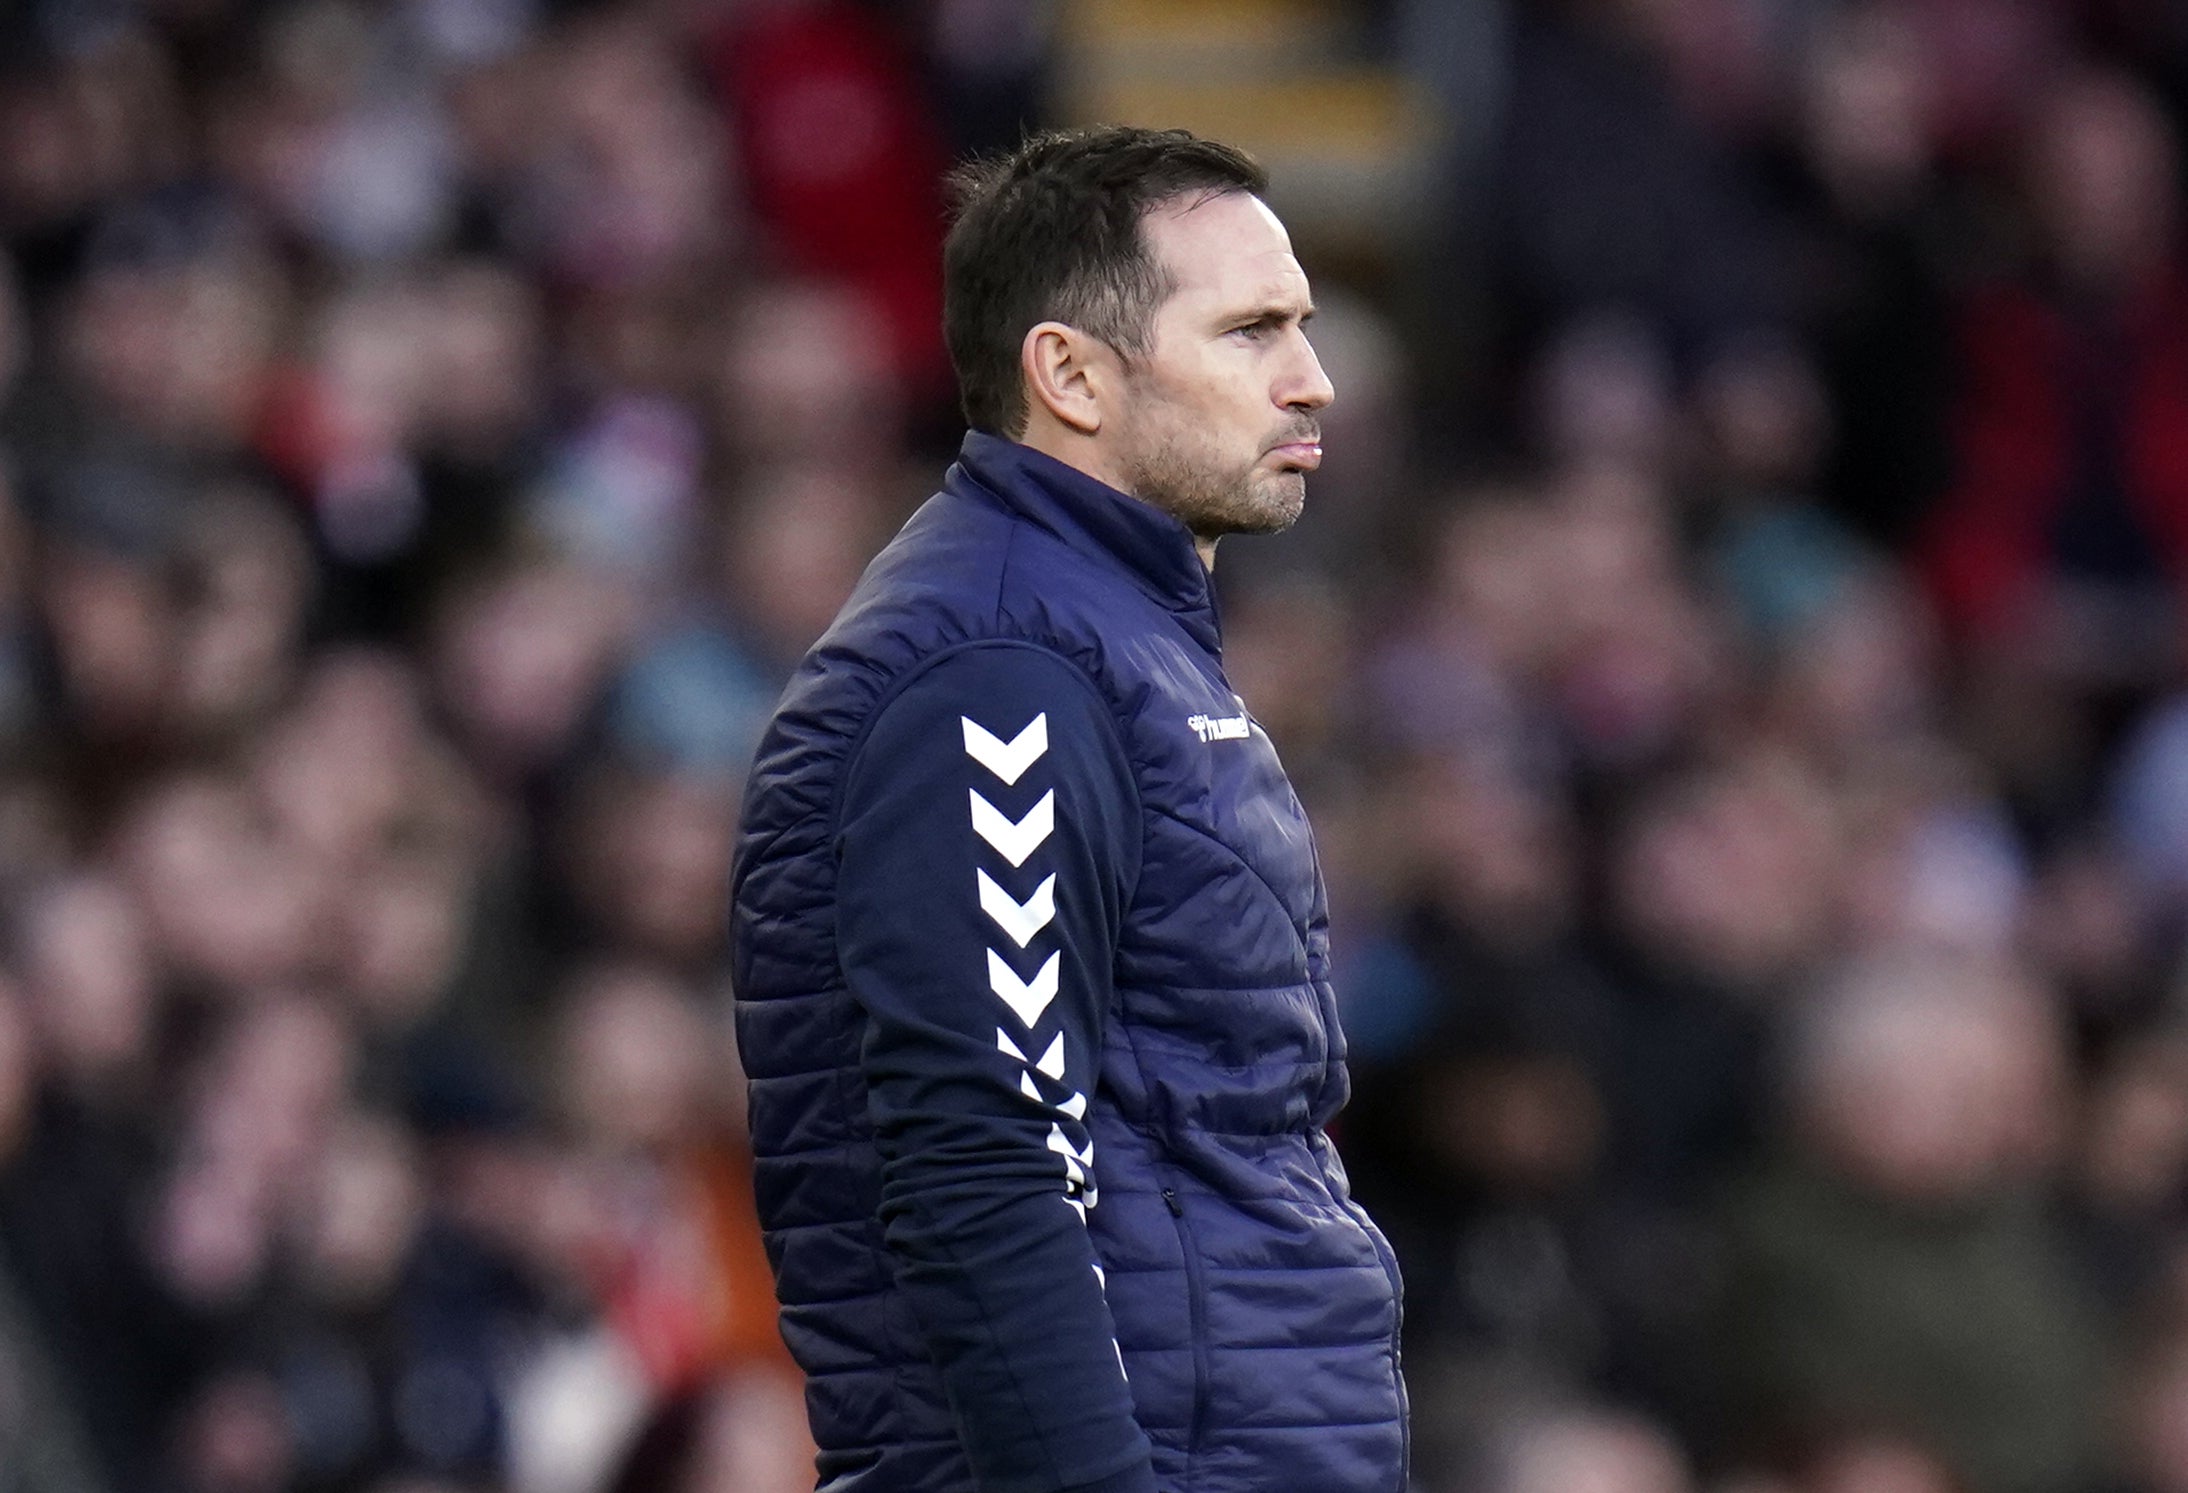 Frank Lampard was furious with VAR official Chris Kavanagh after being denied a late penalty against Manchester City